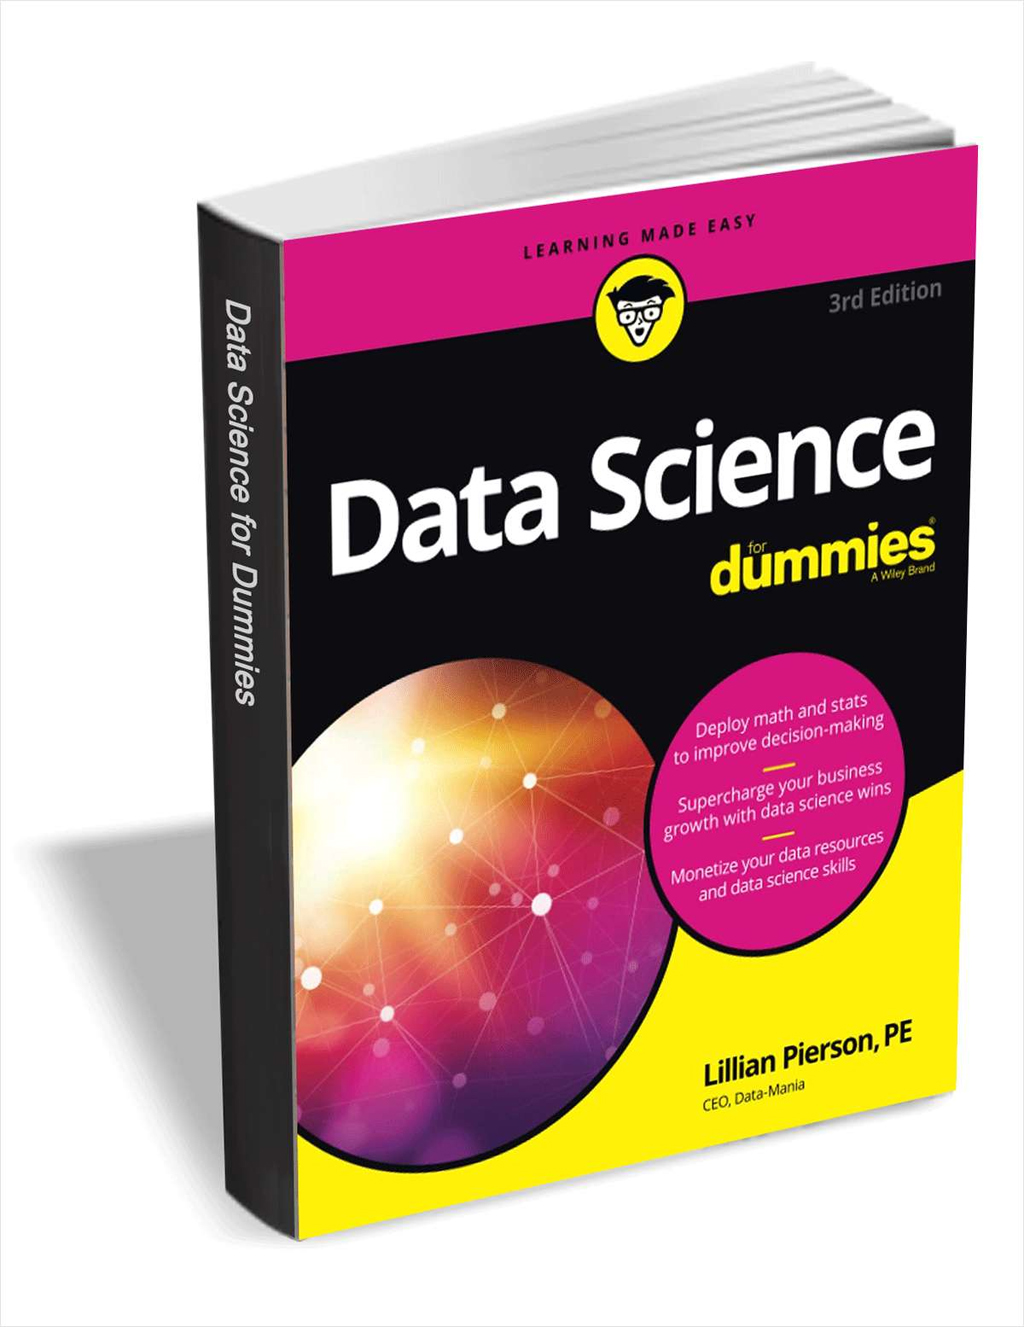 Data Science For Dummies, 3rd Edition ($21.00 Value) FREE for a Limited Time Screenshot